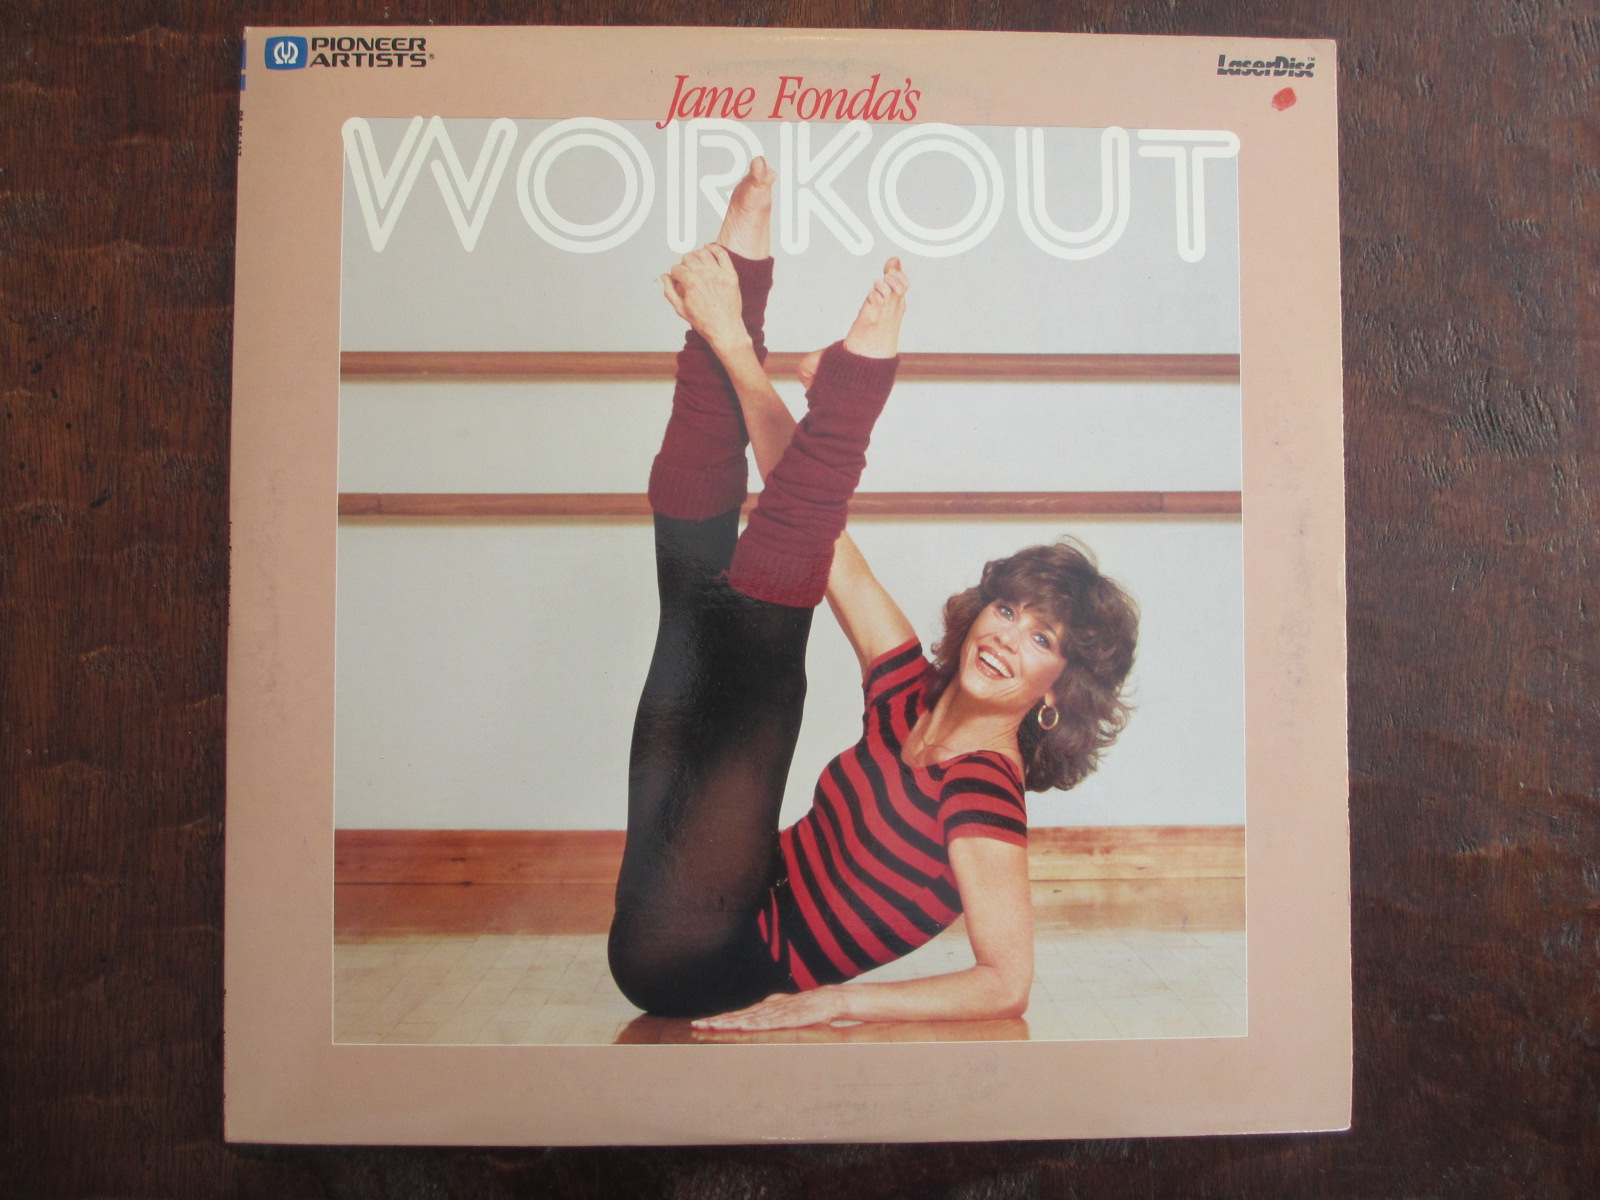 15 Minute Jane Fonda New Workout Cd for Weight Loss